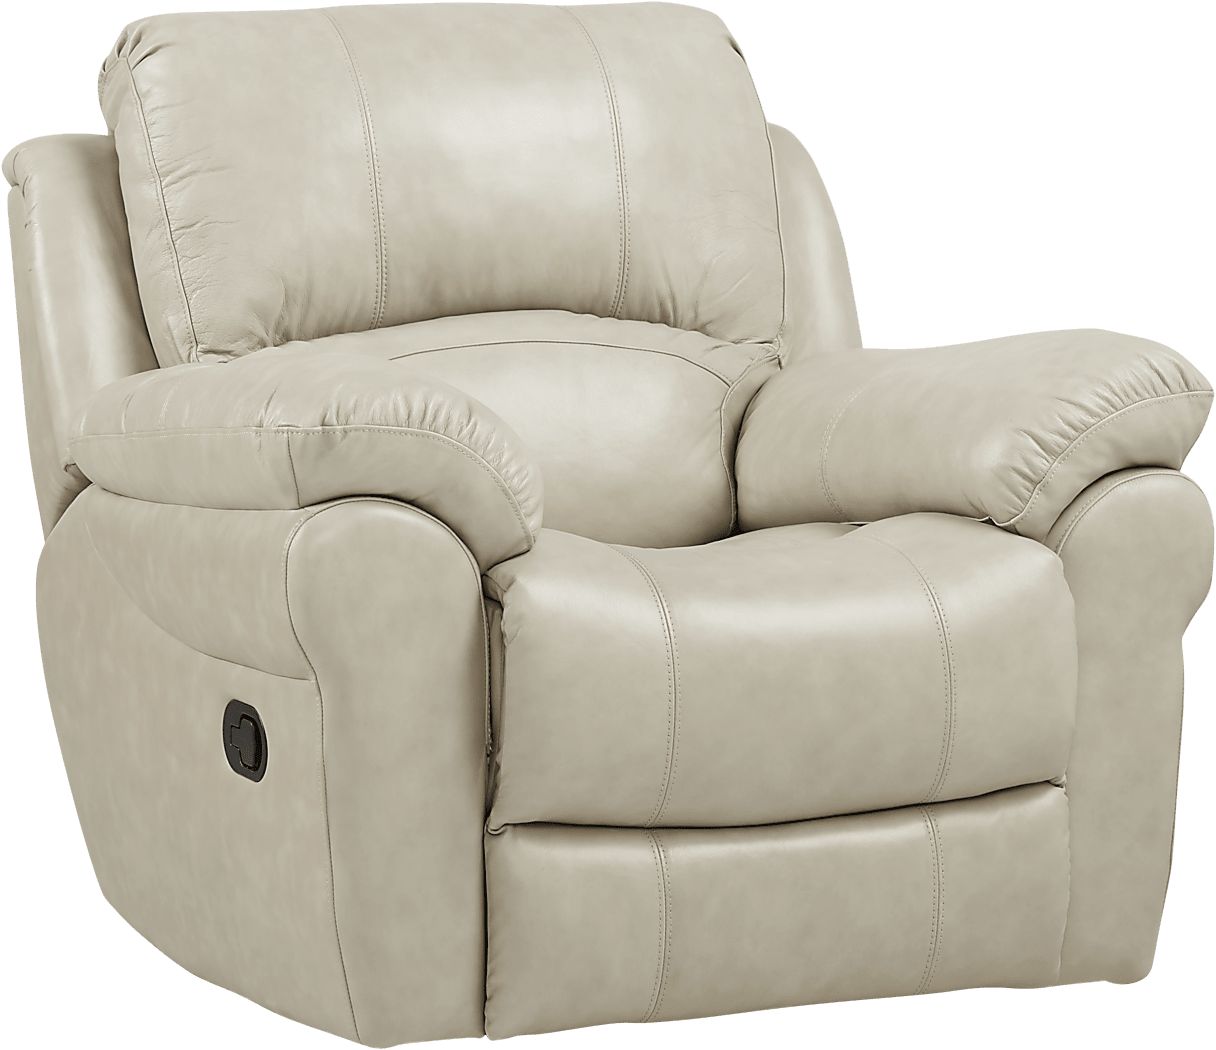 Vercelli Stone Beige Leather Rocker Recliner - Rooms To Go